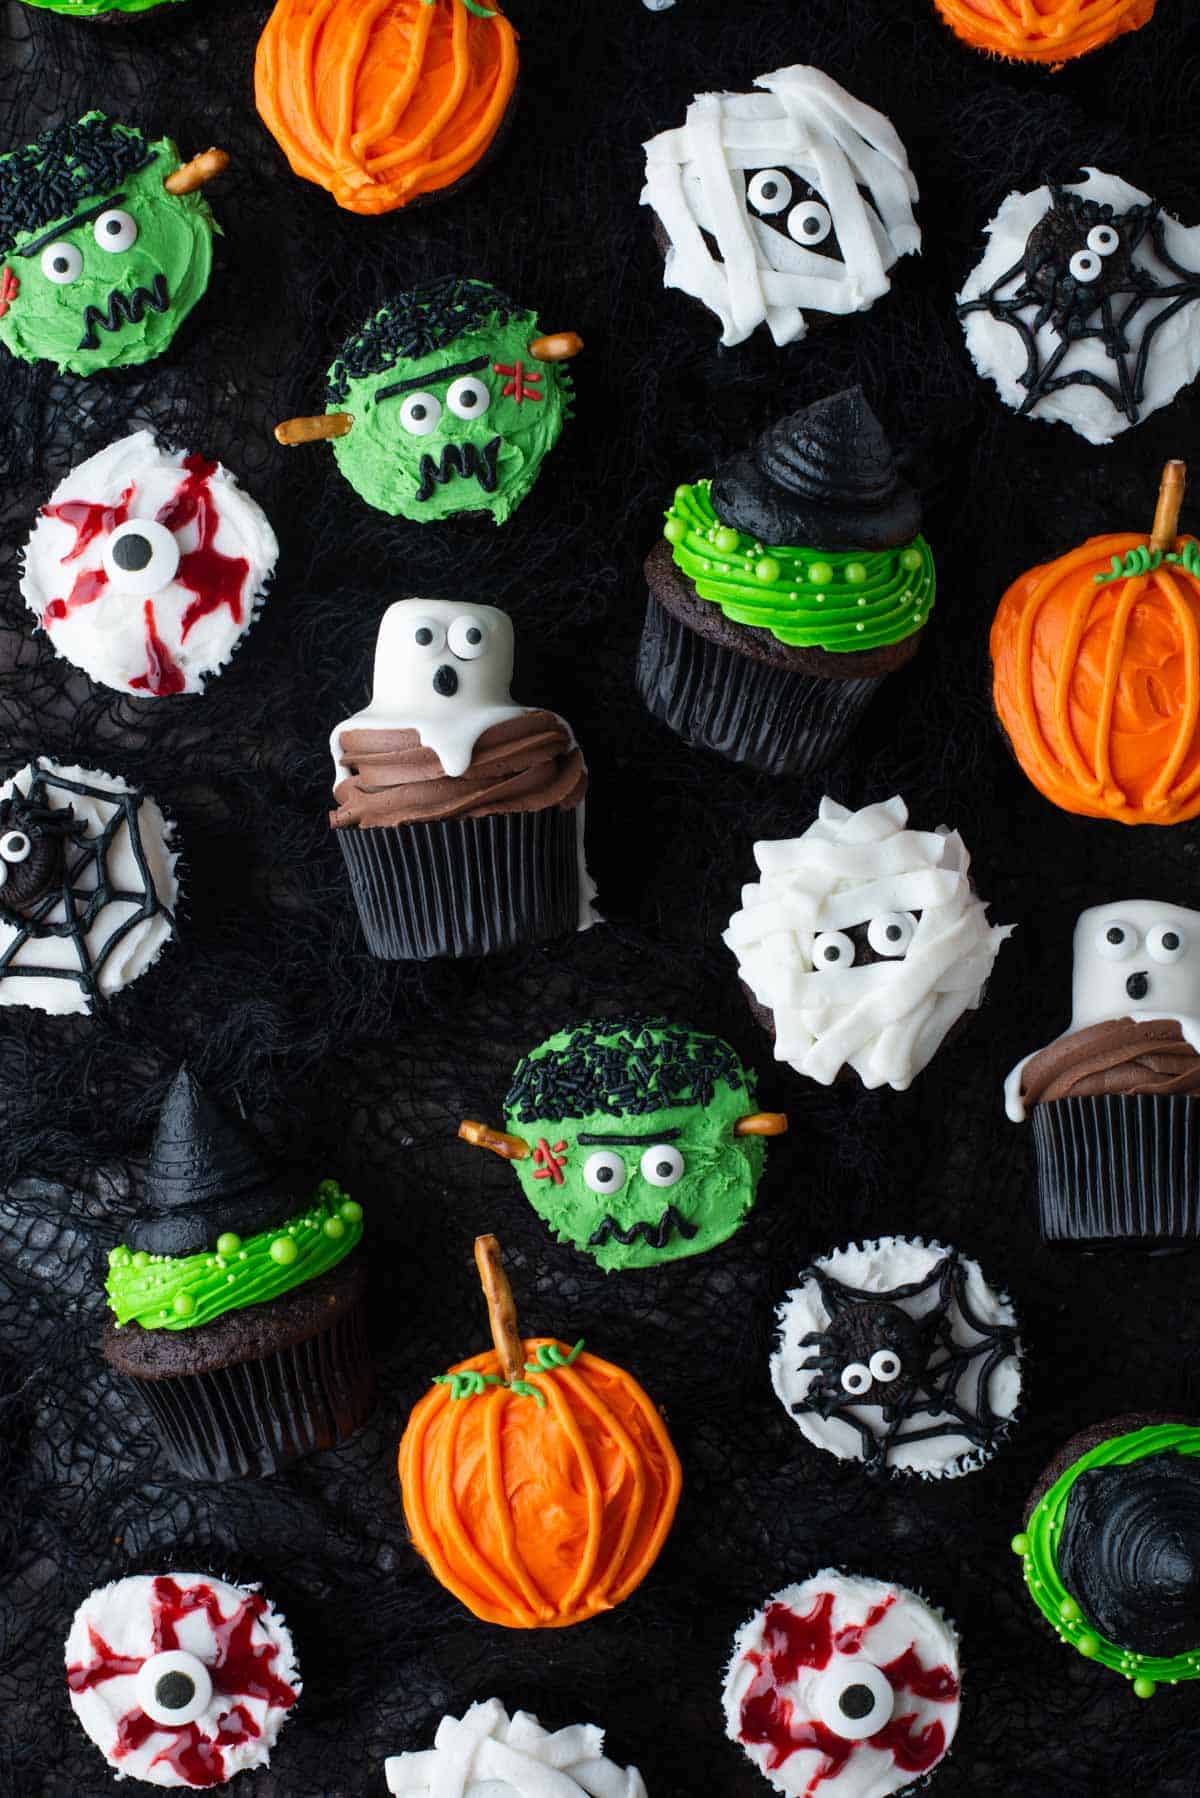 assortment of halloween cupcakes including ghost cupcakes, eyeball cupcakes, mummy cupcakes, frankenstein cupcakes, pumpkin cupcakes, witch hat cupcakes, and spider cupcakes